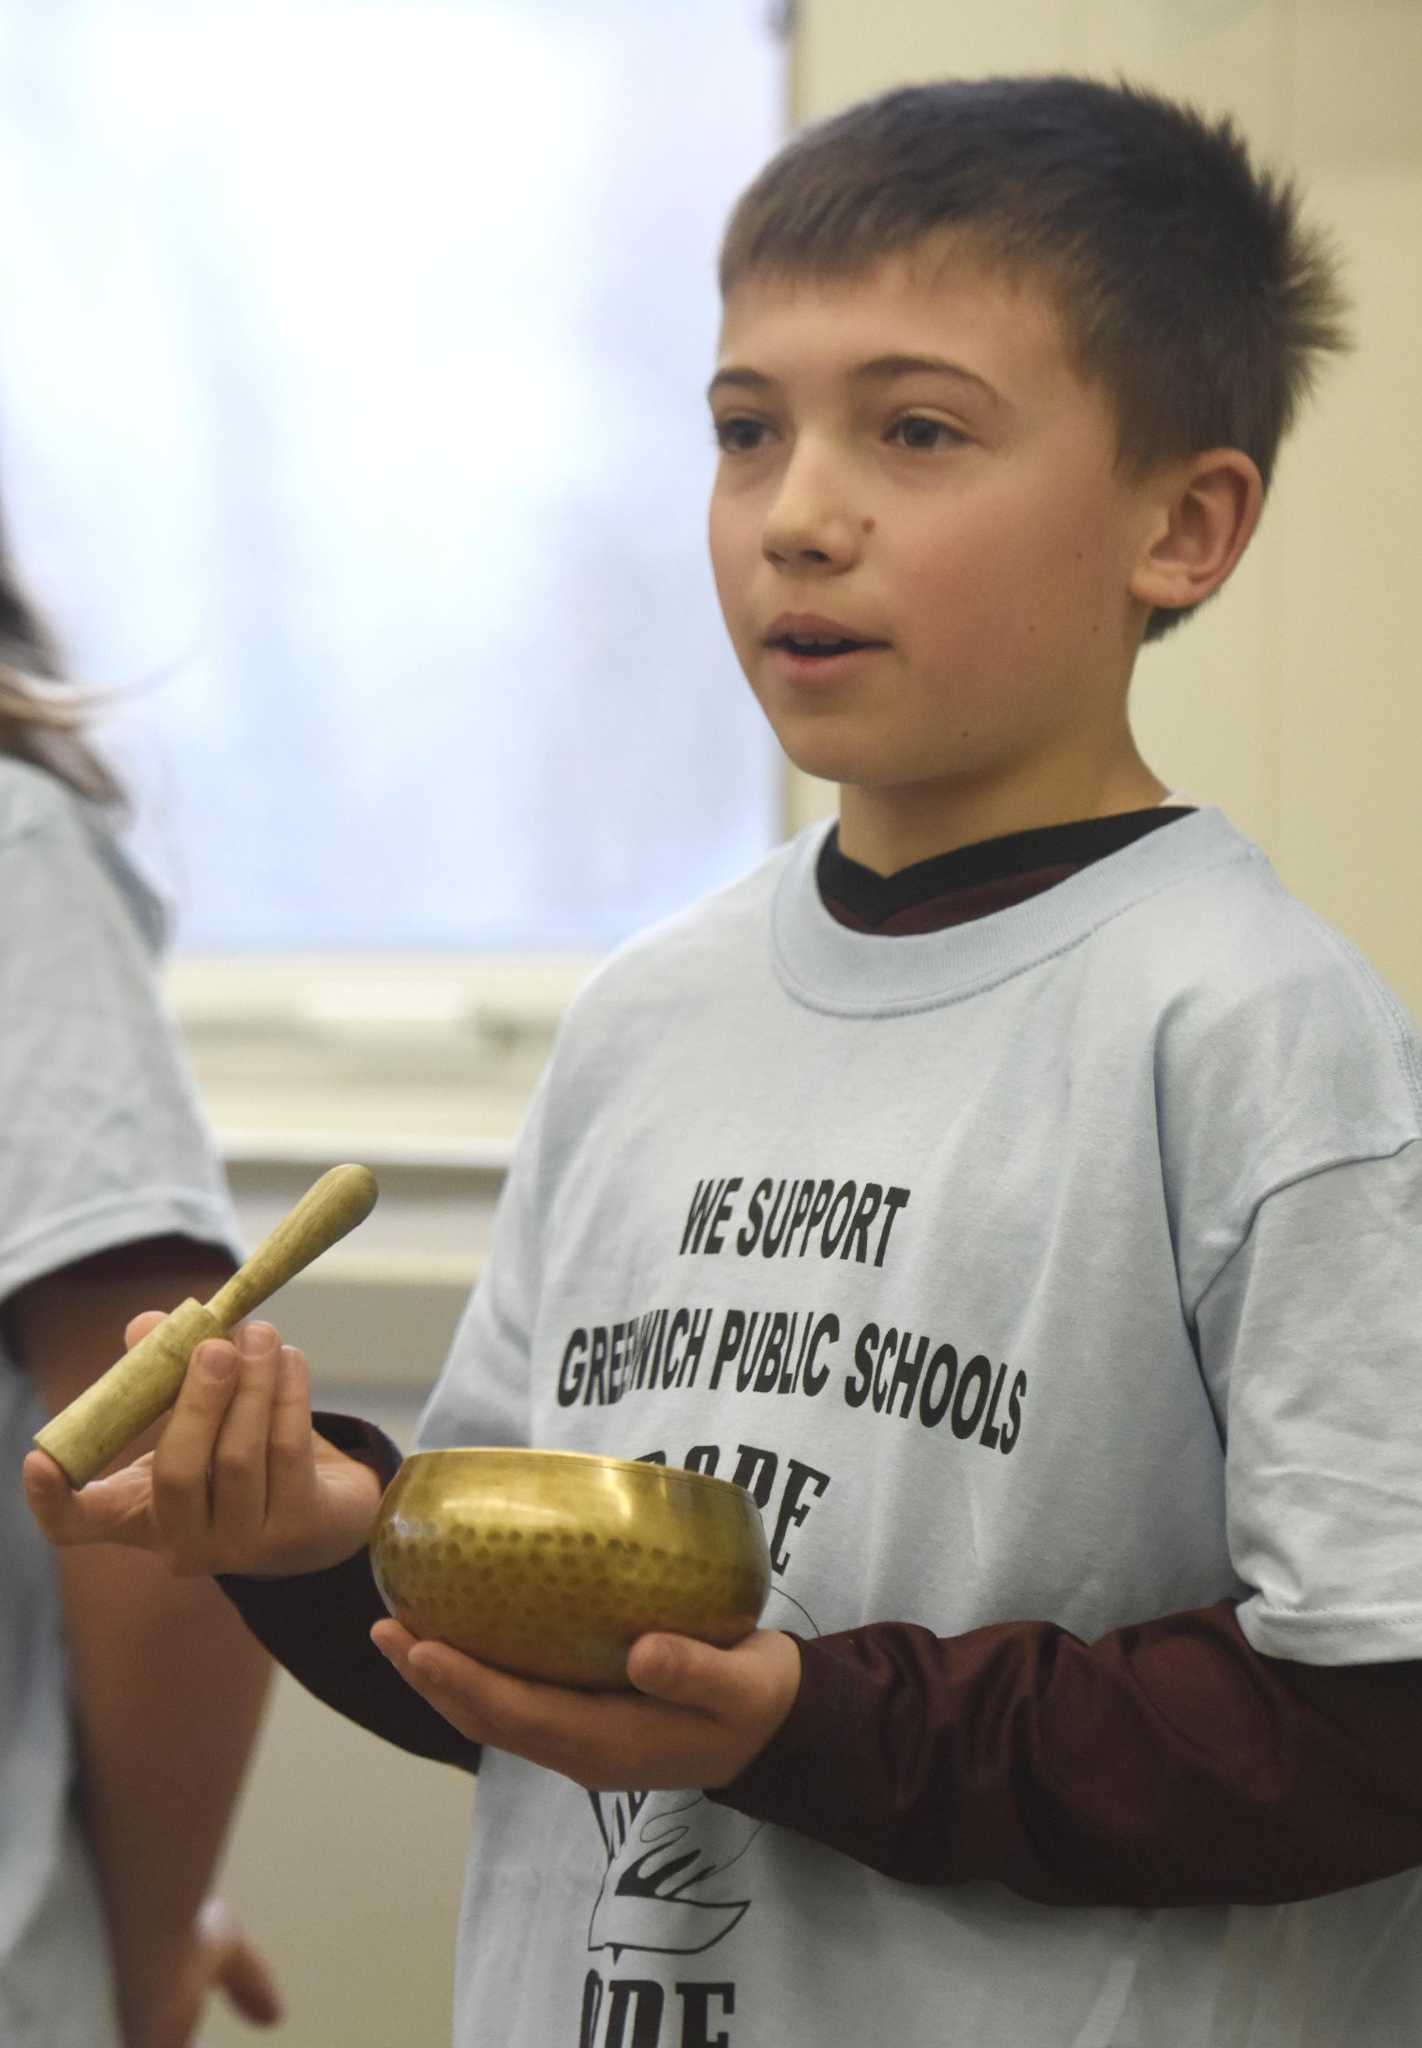 Greenwich Public Schools to hold mindfulness retreats for - Greenwich Time